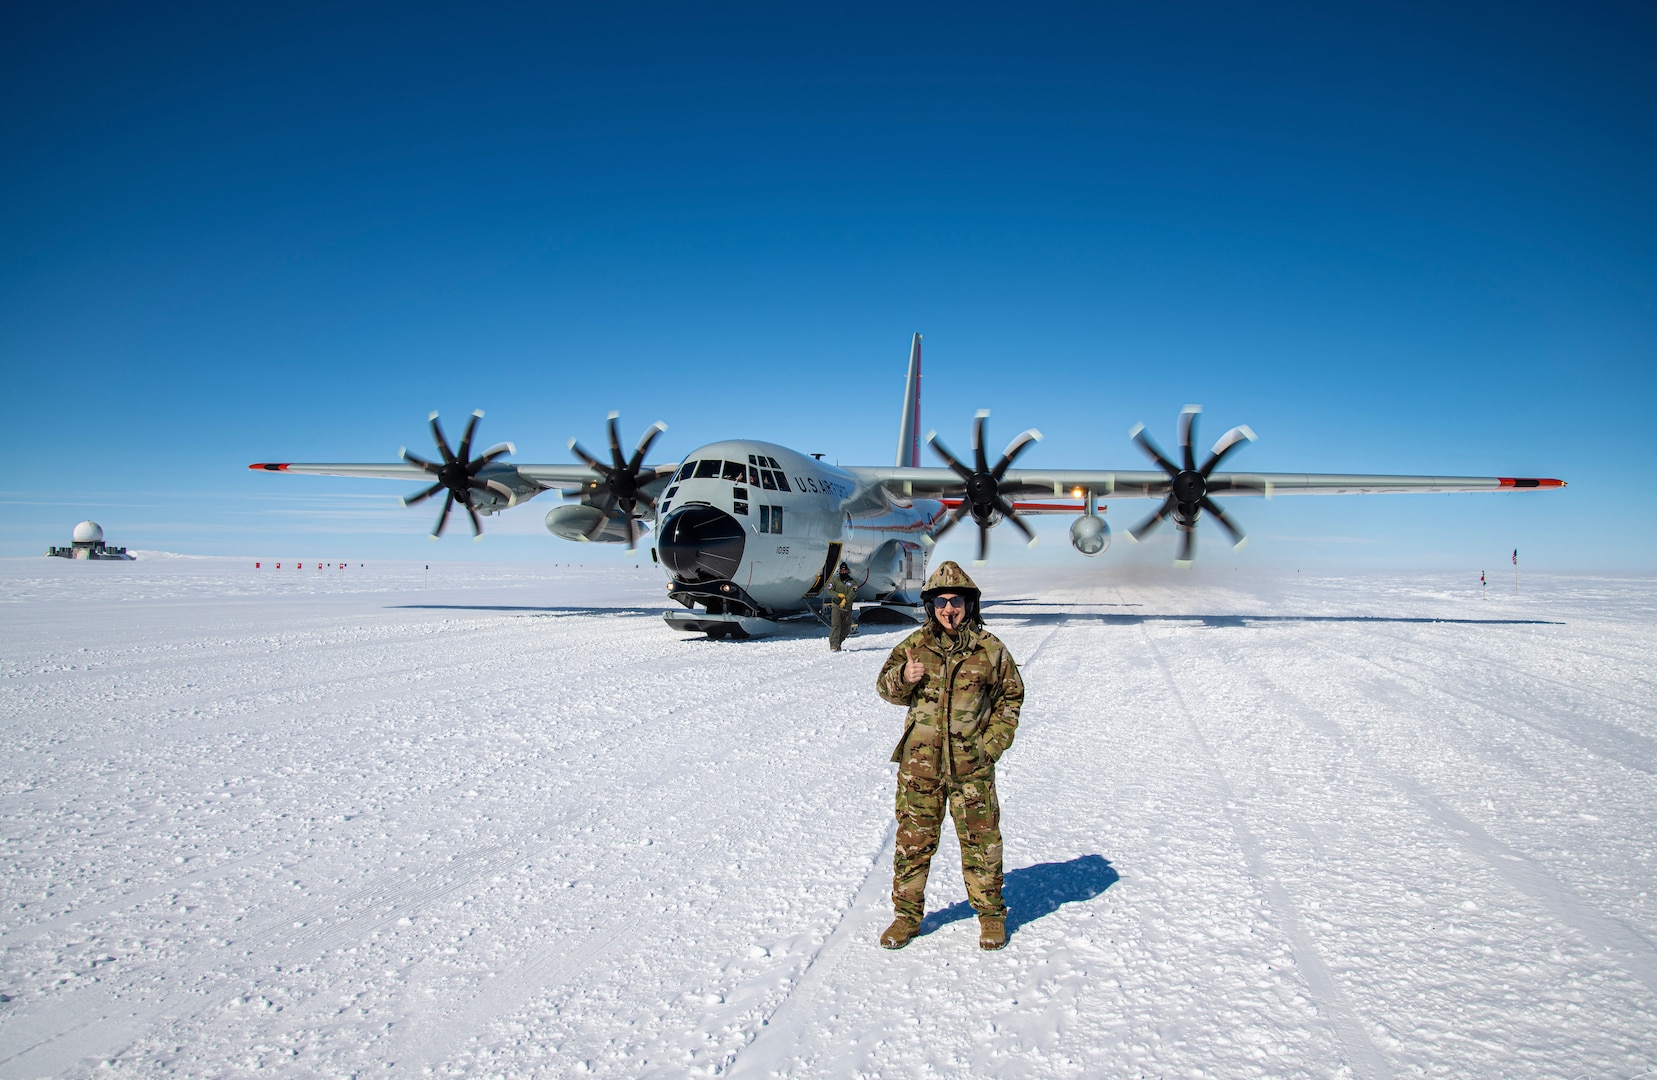 An Airman assigned to the 109th Airlift Wing participates in a training mission at Raven Camp in Greenland in June 3, 2021.  The New York Air National Guard's 109th operates in Greenland April-August each year to resupply the National Science Foundation and conduct polar operations training.